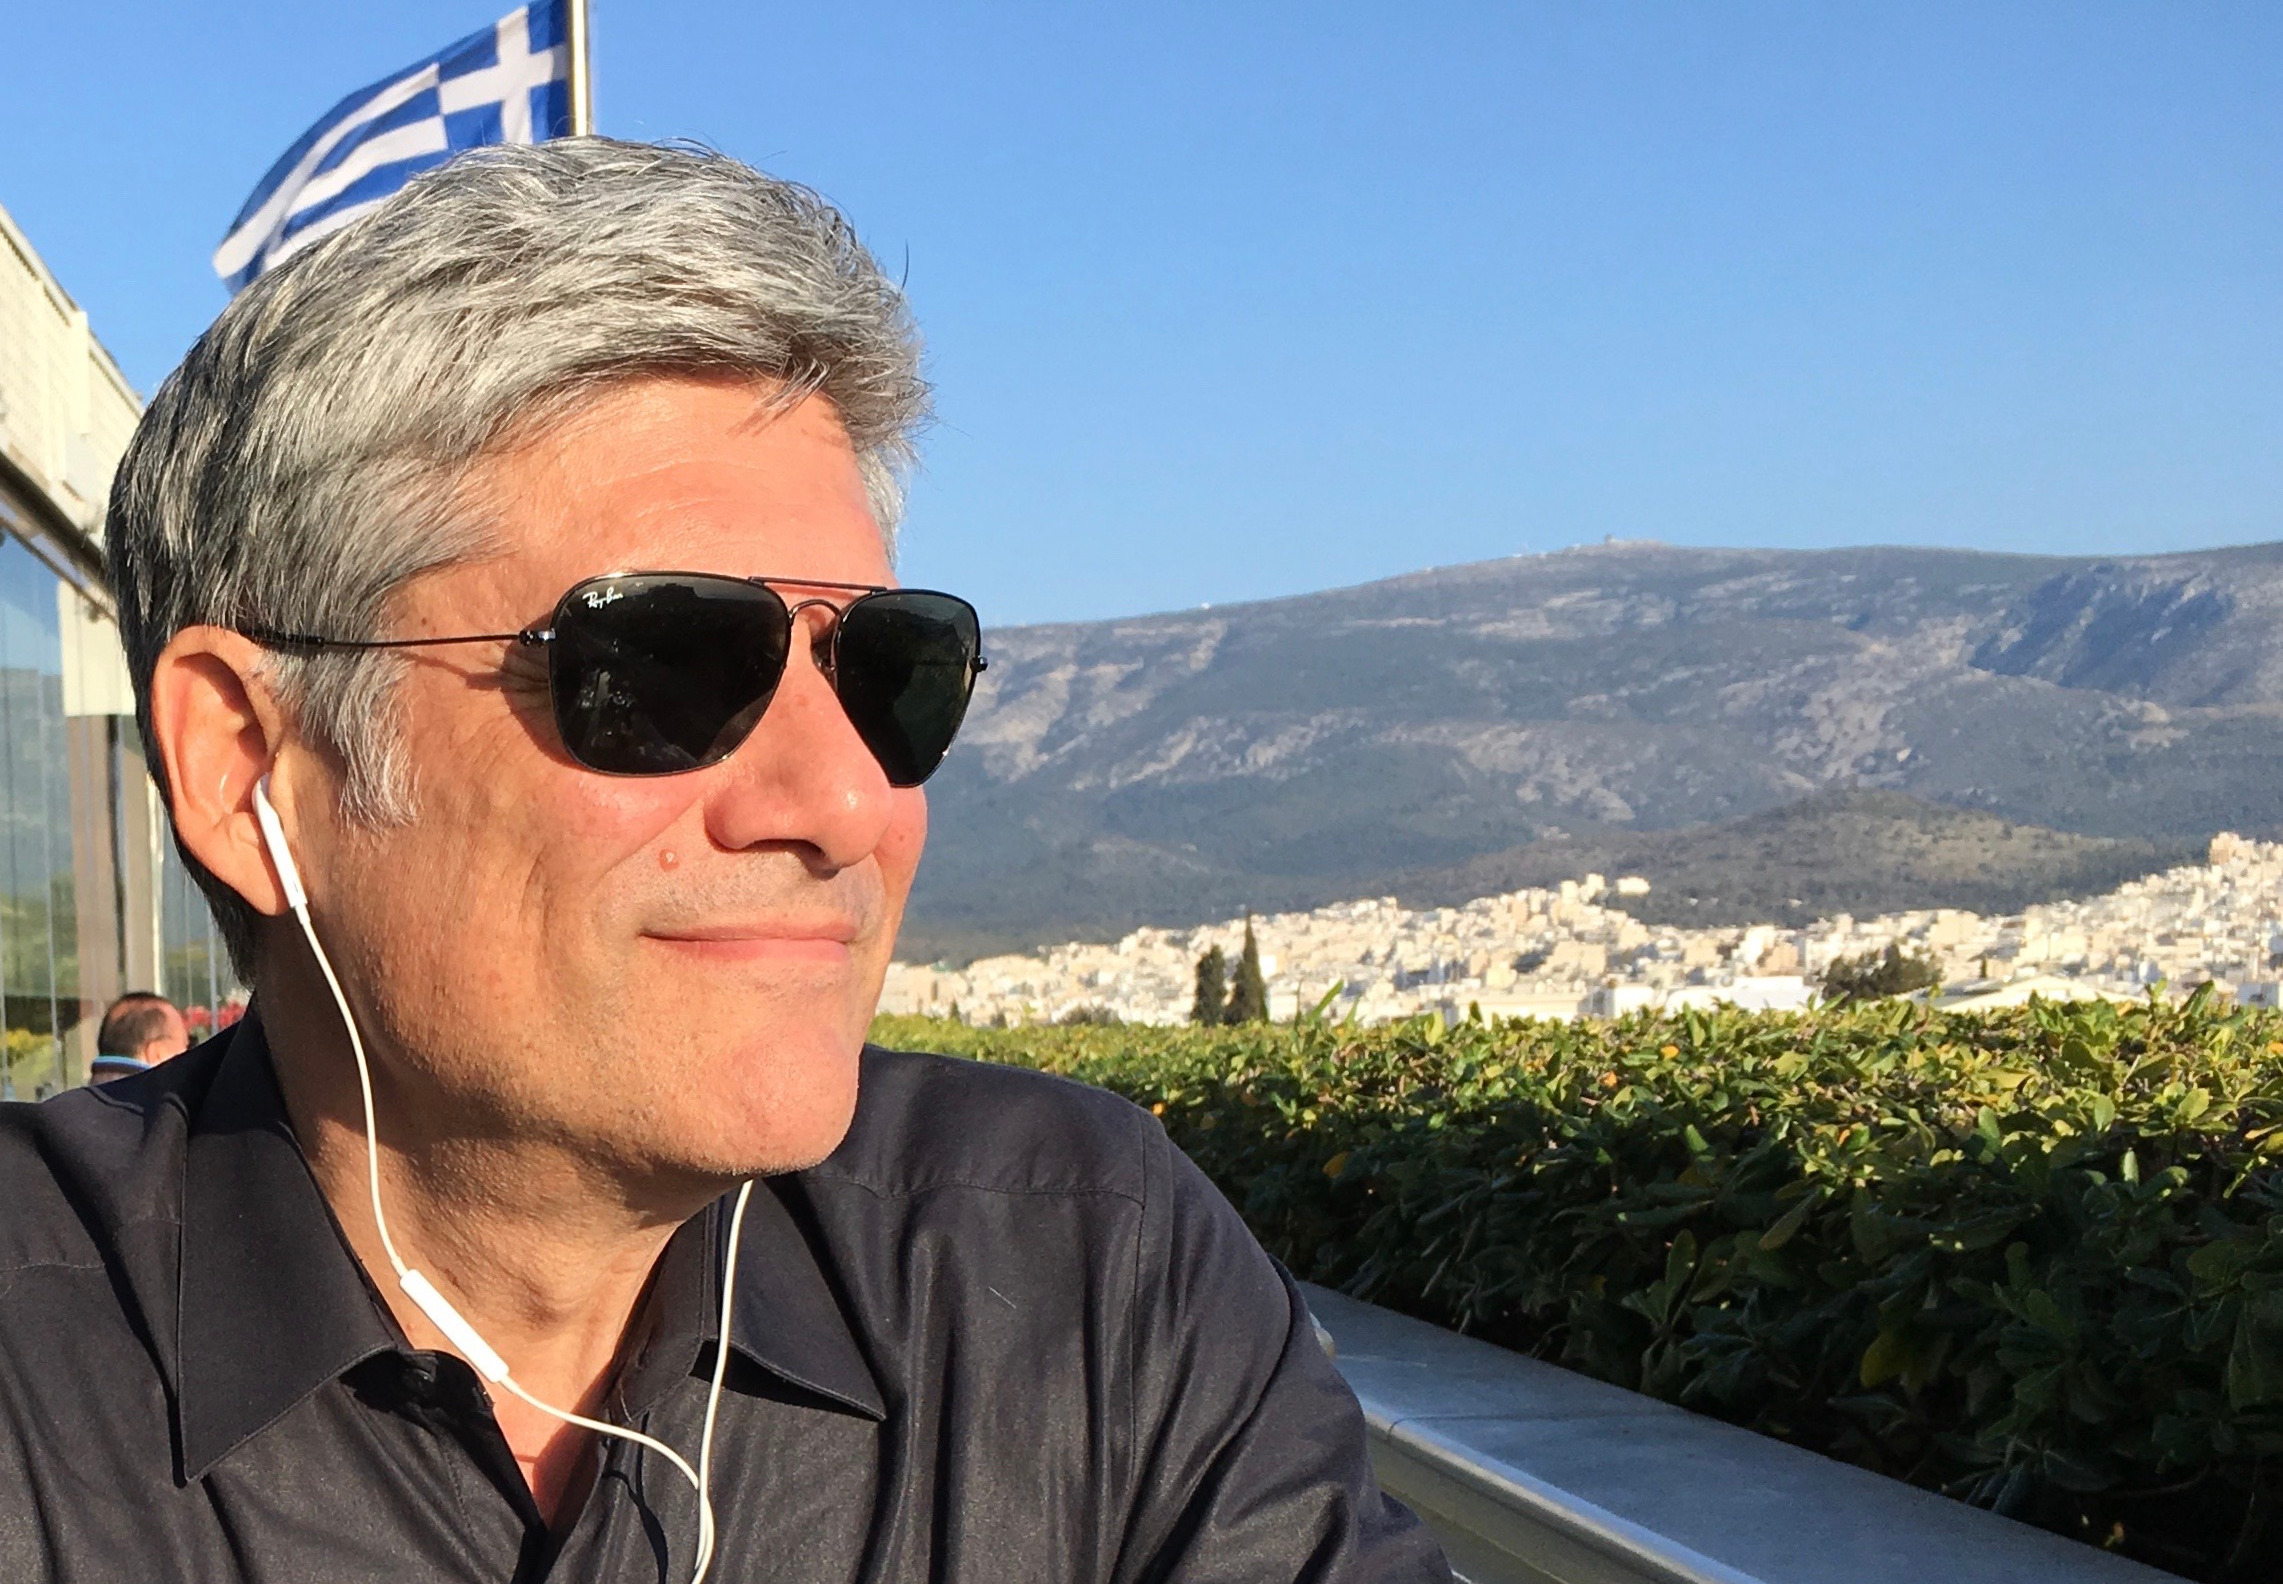 Georges will share "his" Athens for a France 24 cultural program